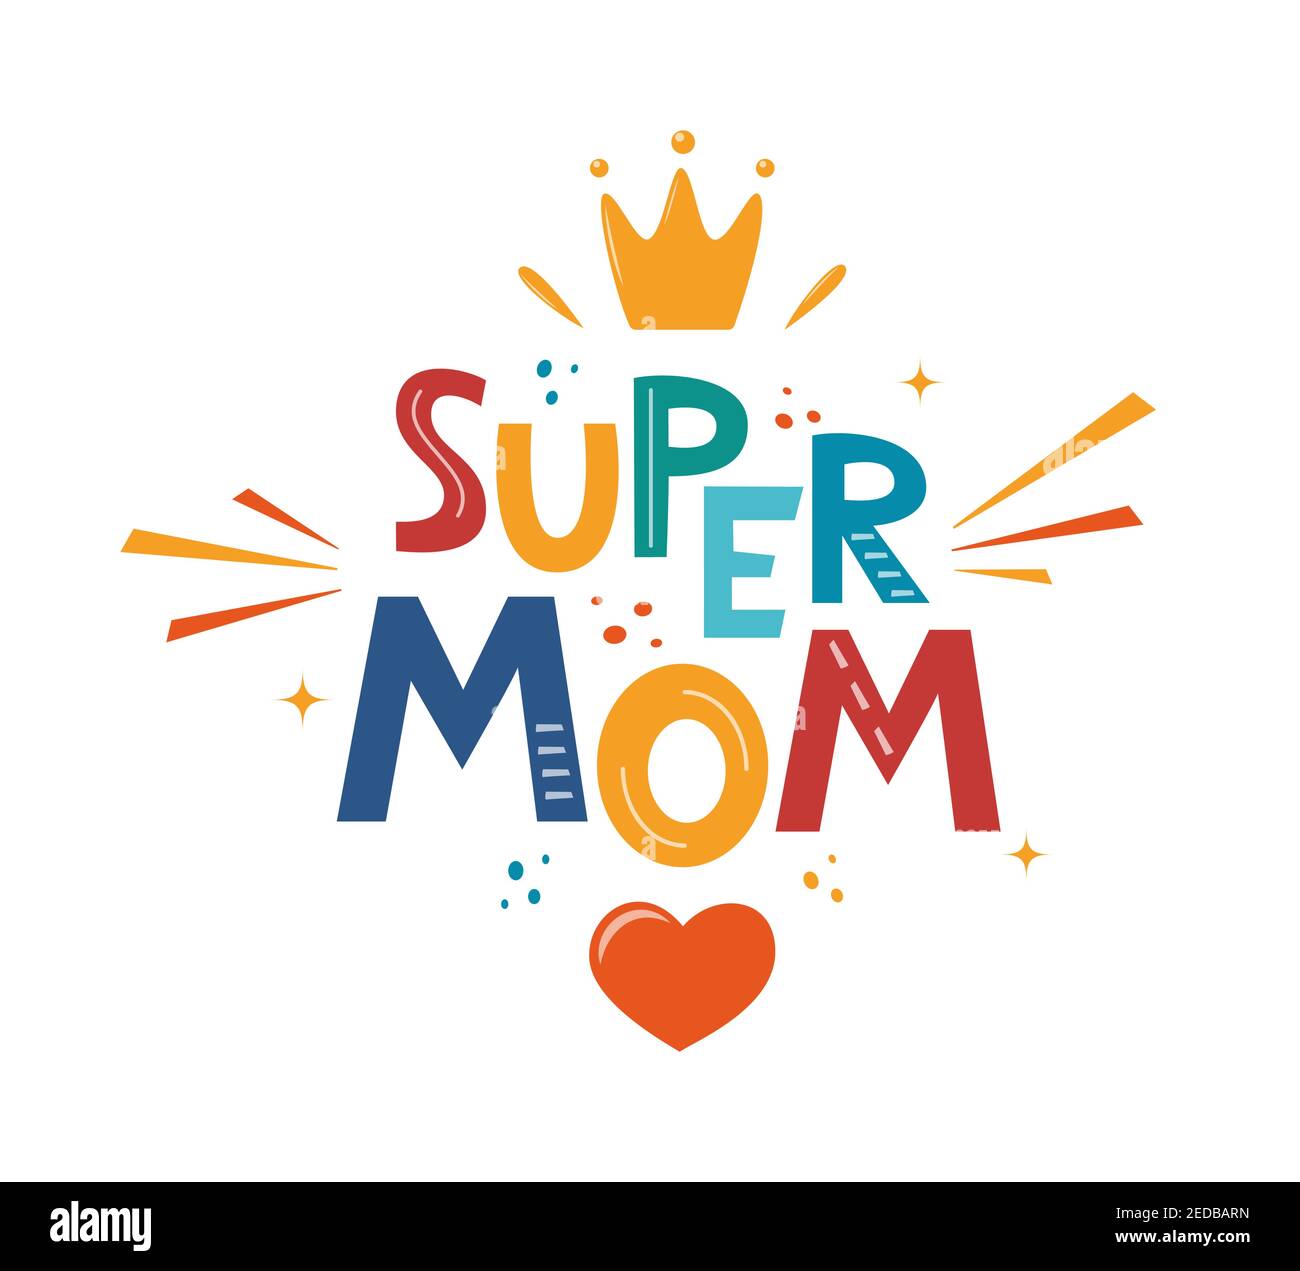 Super mom, hand drawn illustration for mothers day. Hand drawn lettering phrase for poster, logo, greeting card, banner, cute cartoon print. Vector il Stock Vector